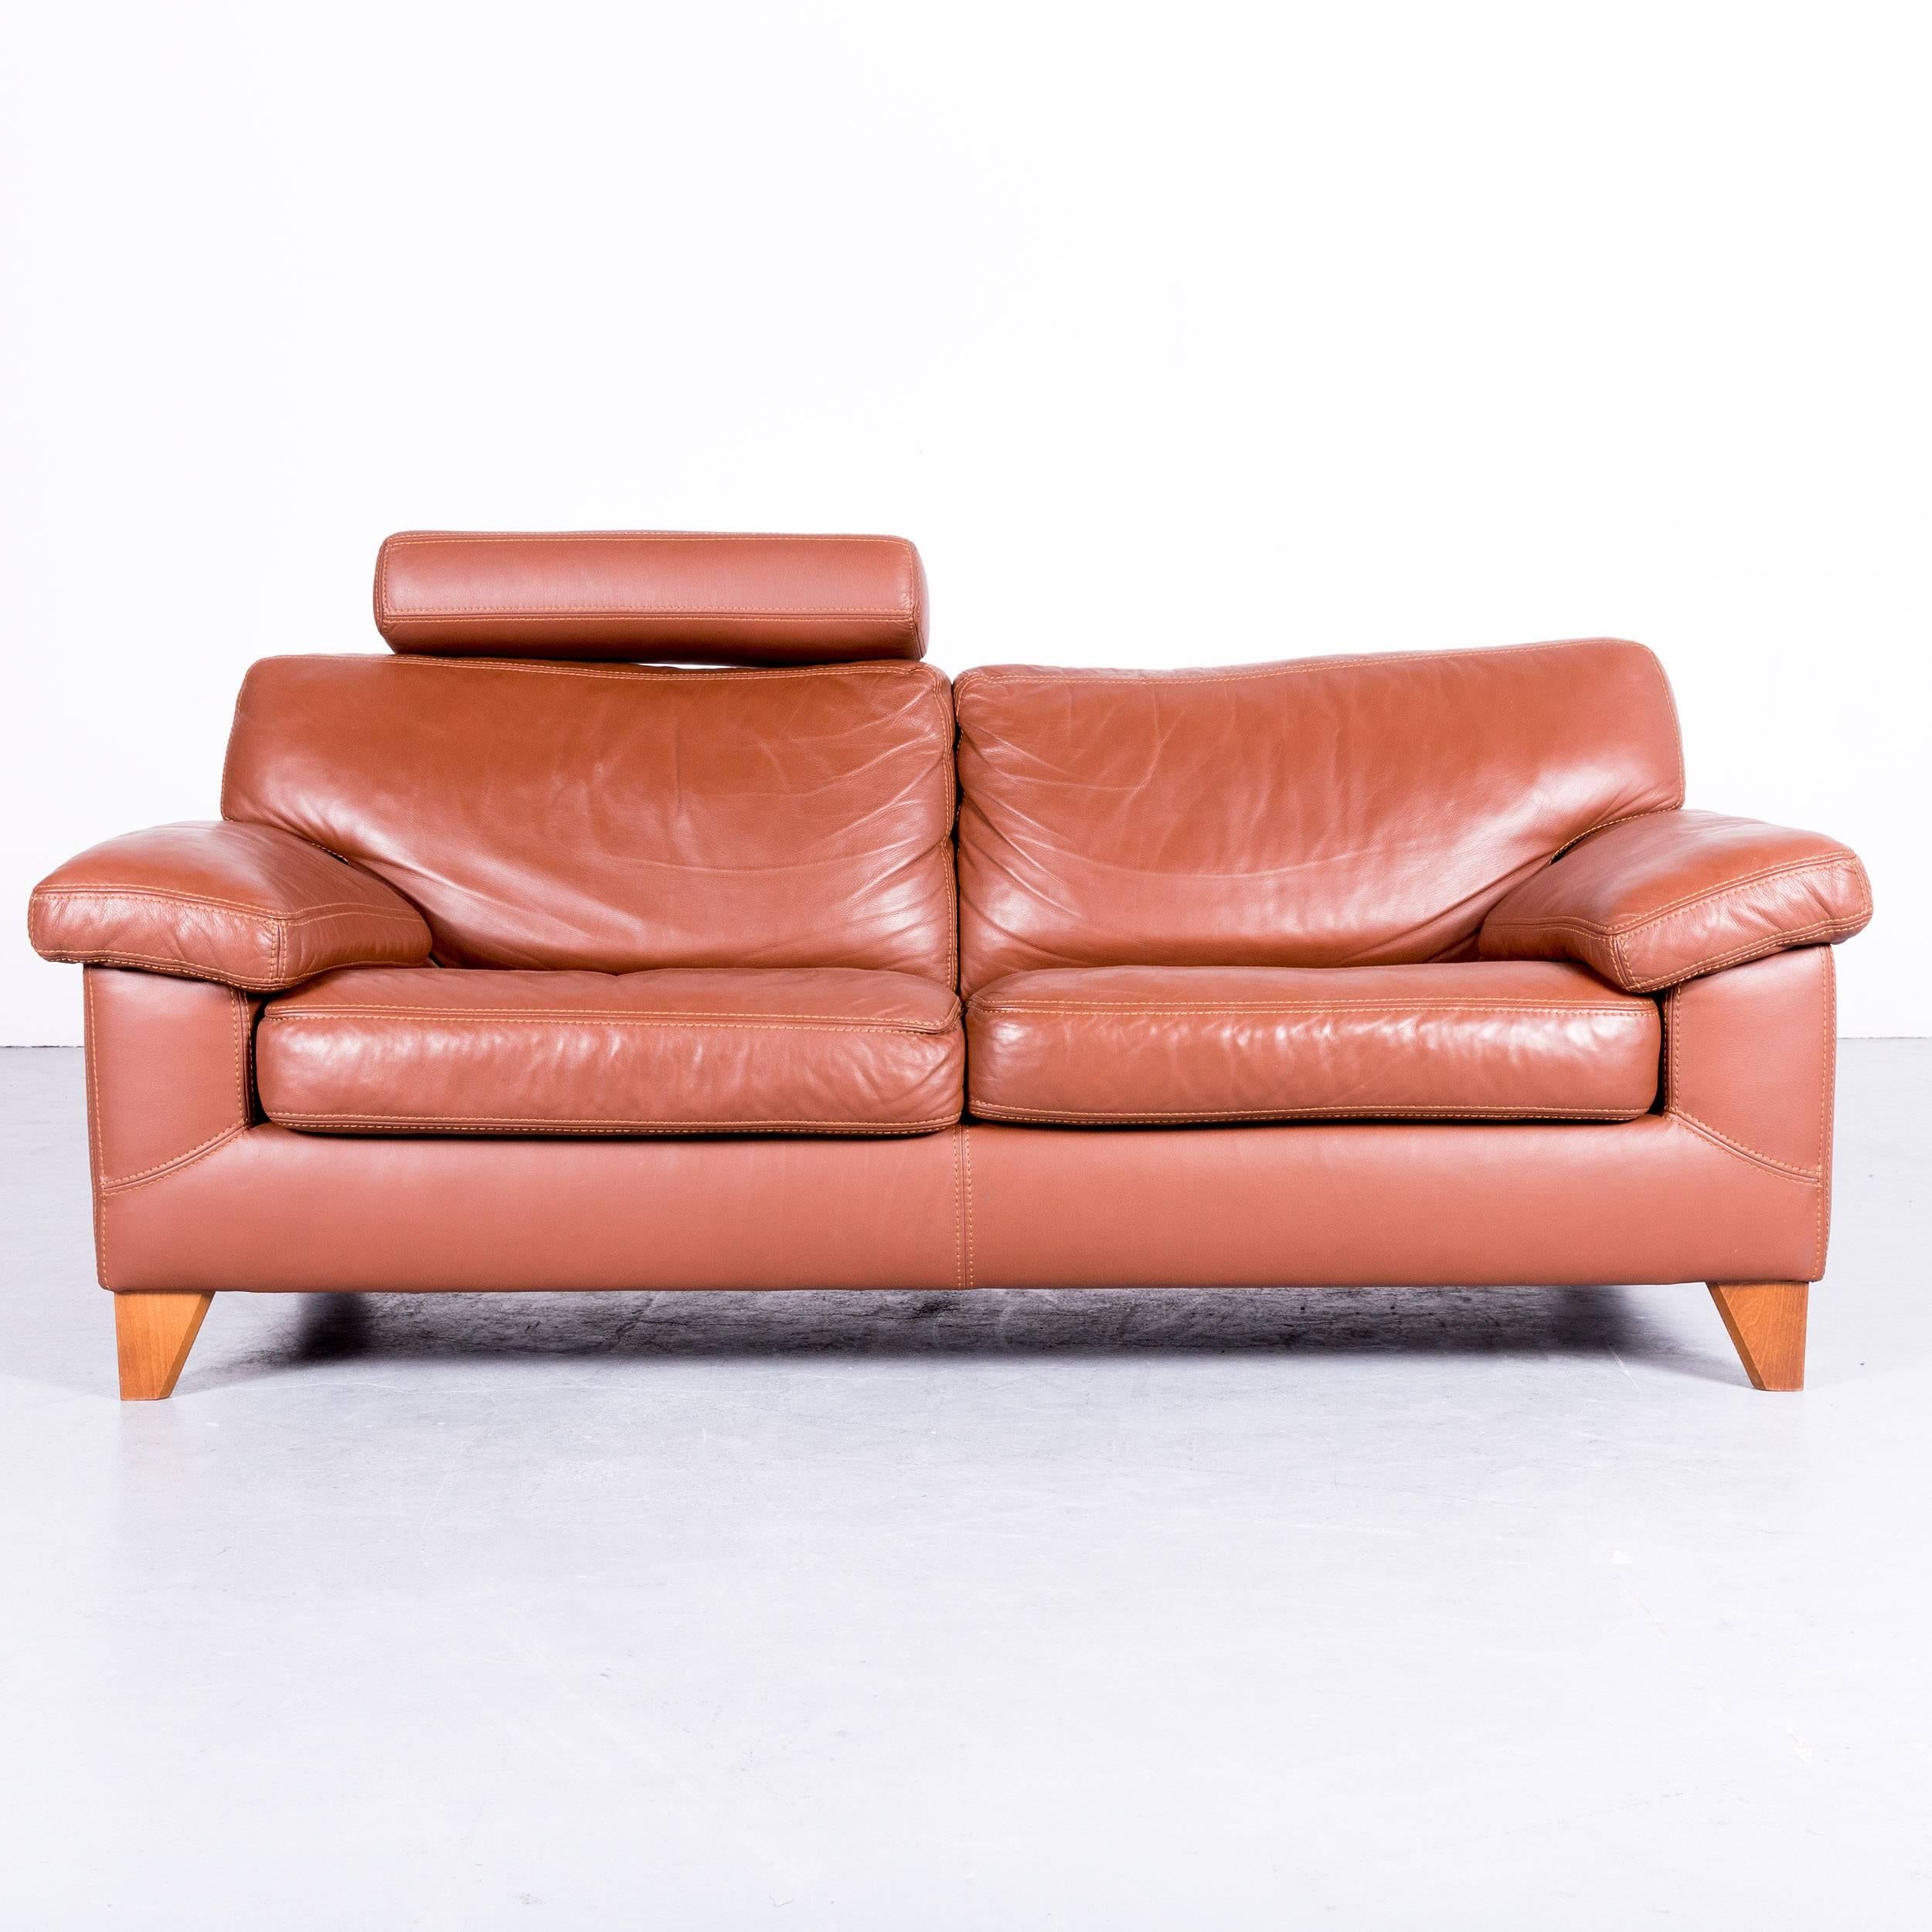 Brown colored original Machalke designer leather sofa with neck rest, in a minimalistic and modern design, made for pure comfort and flexibility.